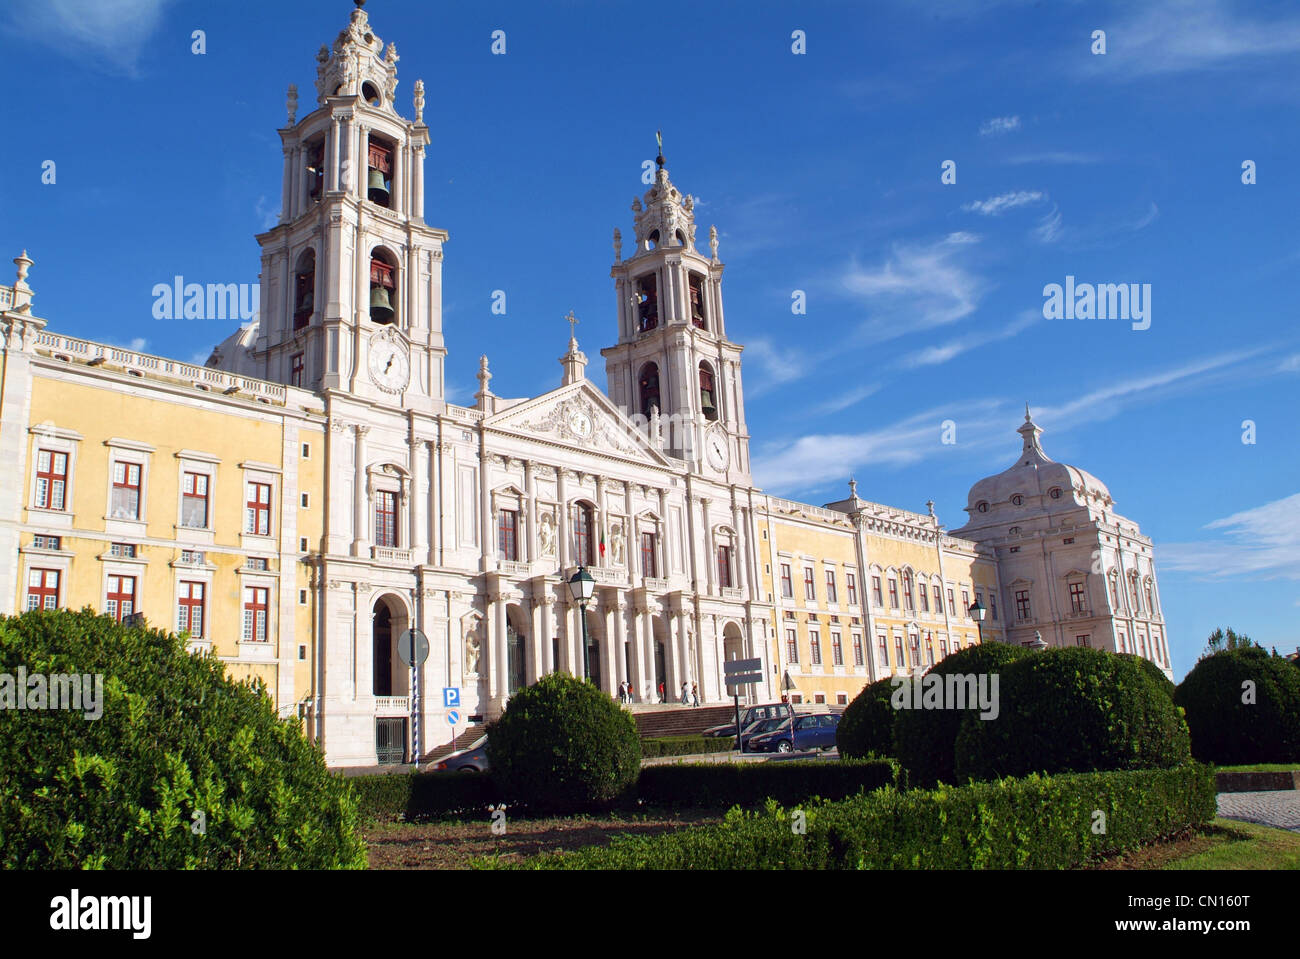 Convent of Mafra, Mafra National Palace and Convent in Portugal. Belonged to the Franciscan order. Baroque building Stock Photo